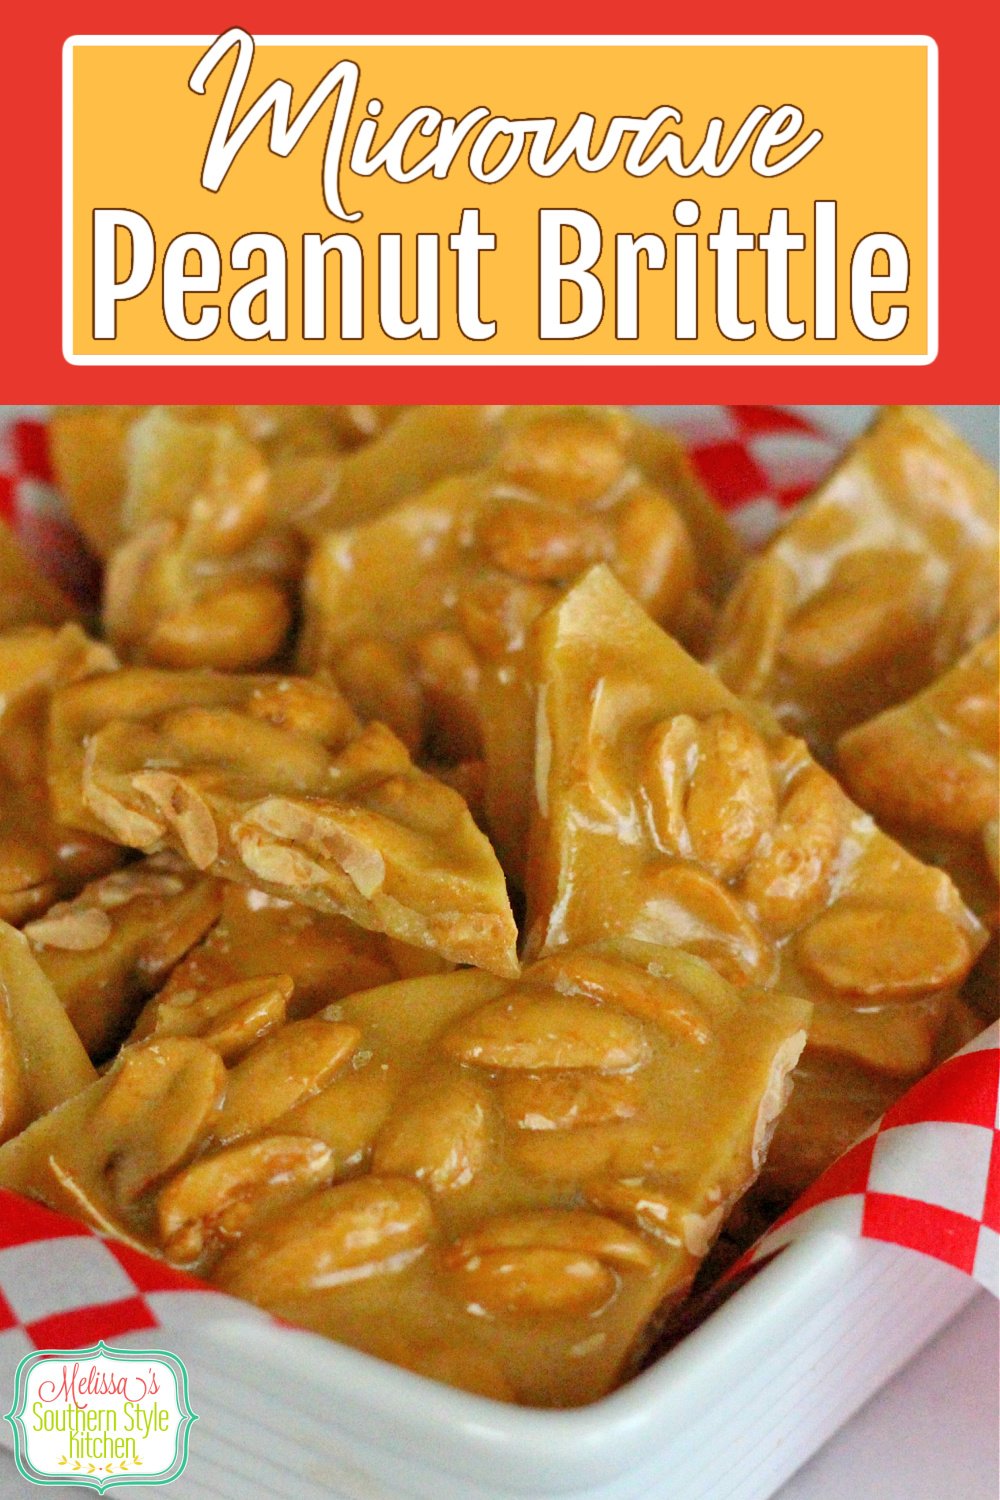 Make buttery peanut brittle in no time flat using a microwave #microwavepeanutbrittle #peanutbrittle #peanuts #candy #holidayrecipes #southernfood #desserts #dessertfoodrecipes #christmasrecipes #southernrecipes #christmascandy #holidaydesserts via @melissasssk